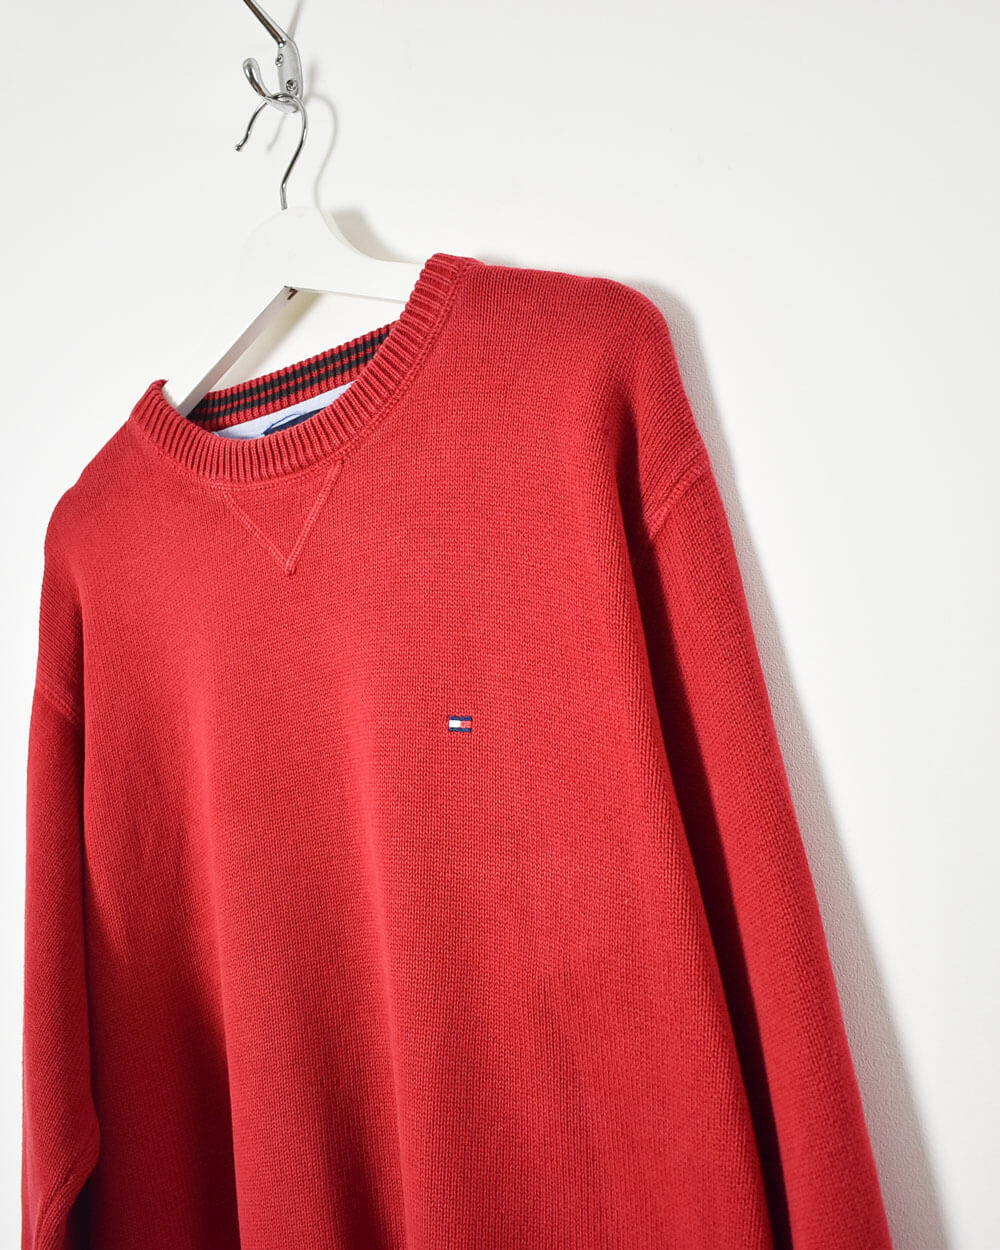 Red Tommy Hilfiger Knitted Sweatshirt - X-Large